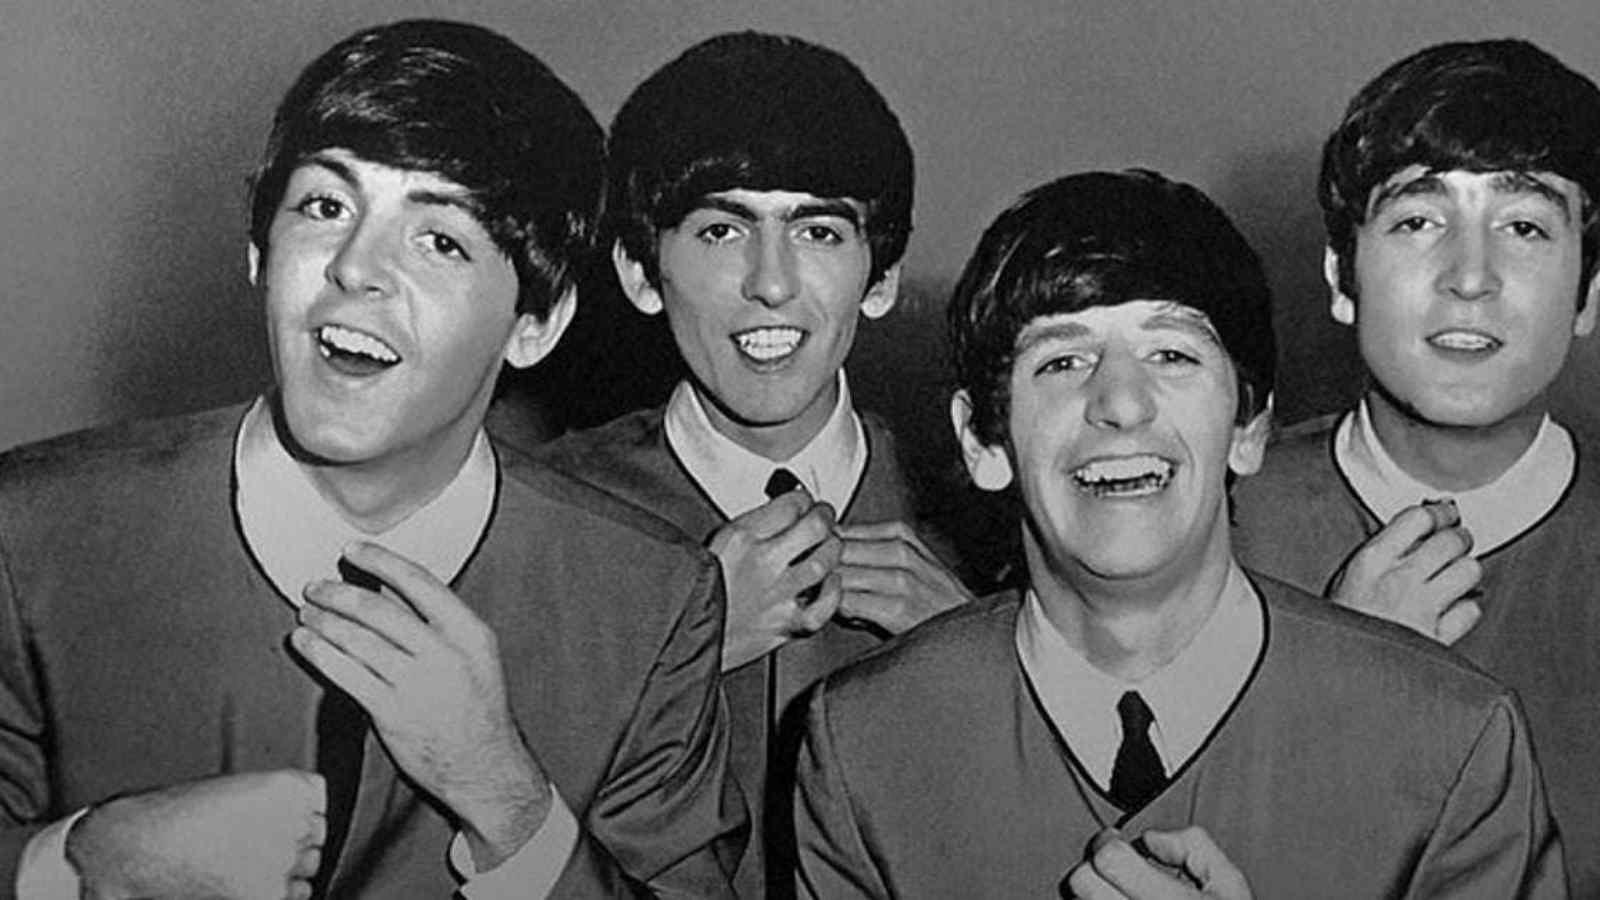 Son Of the Late Photographer of The Beatles Revealed Never Seen Images Of the Band